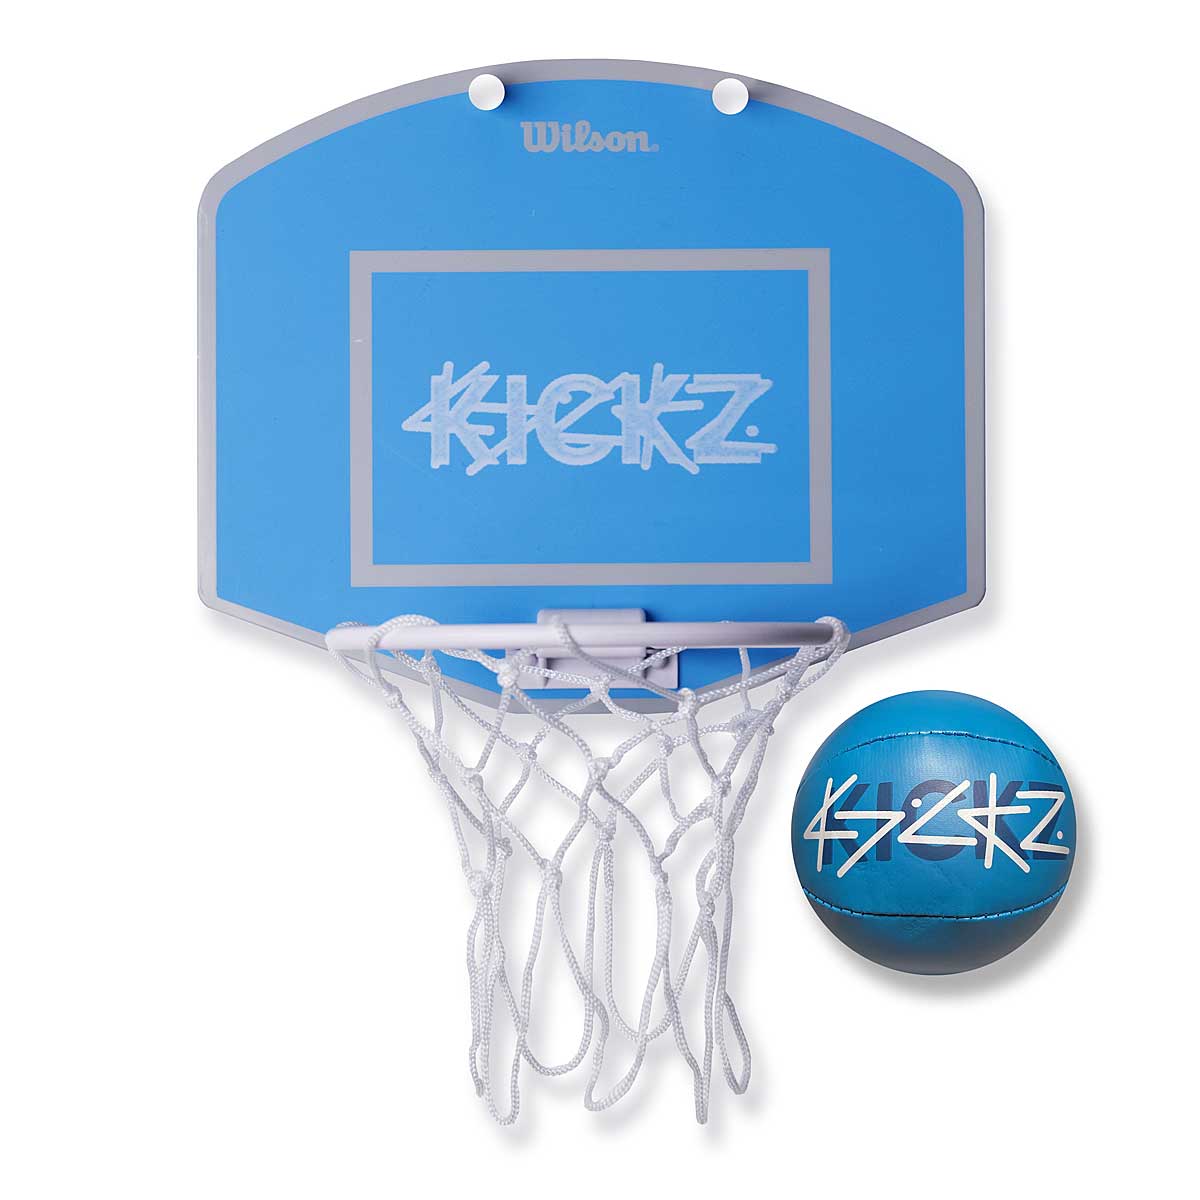 Image of Wilson X Kickz Cold As Ice Limited Edition Mini Hoop, Blue